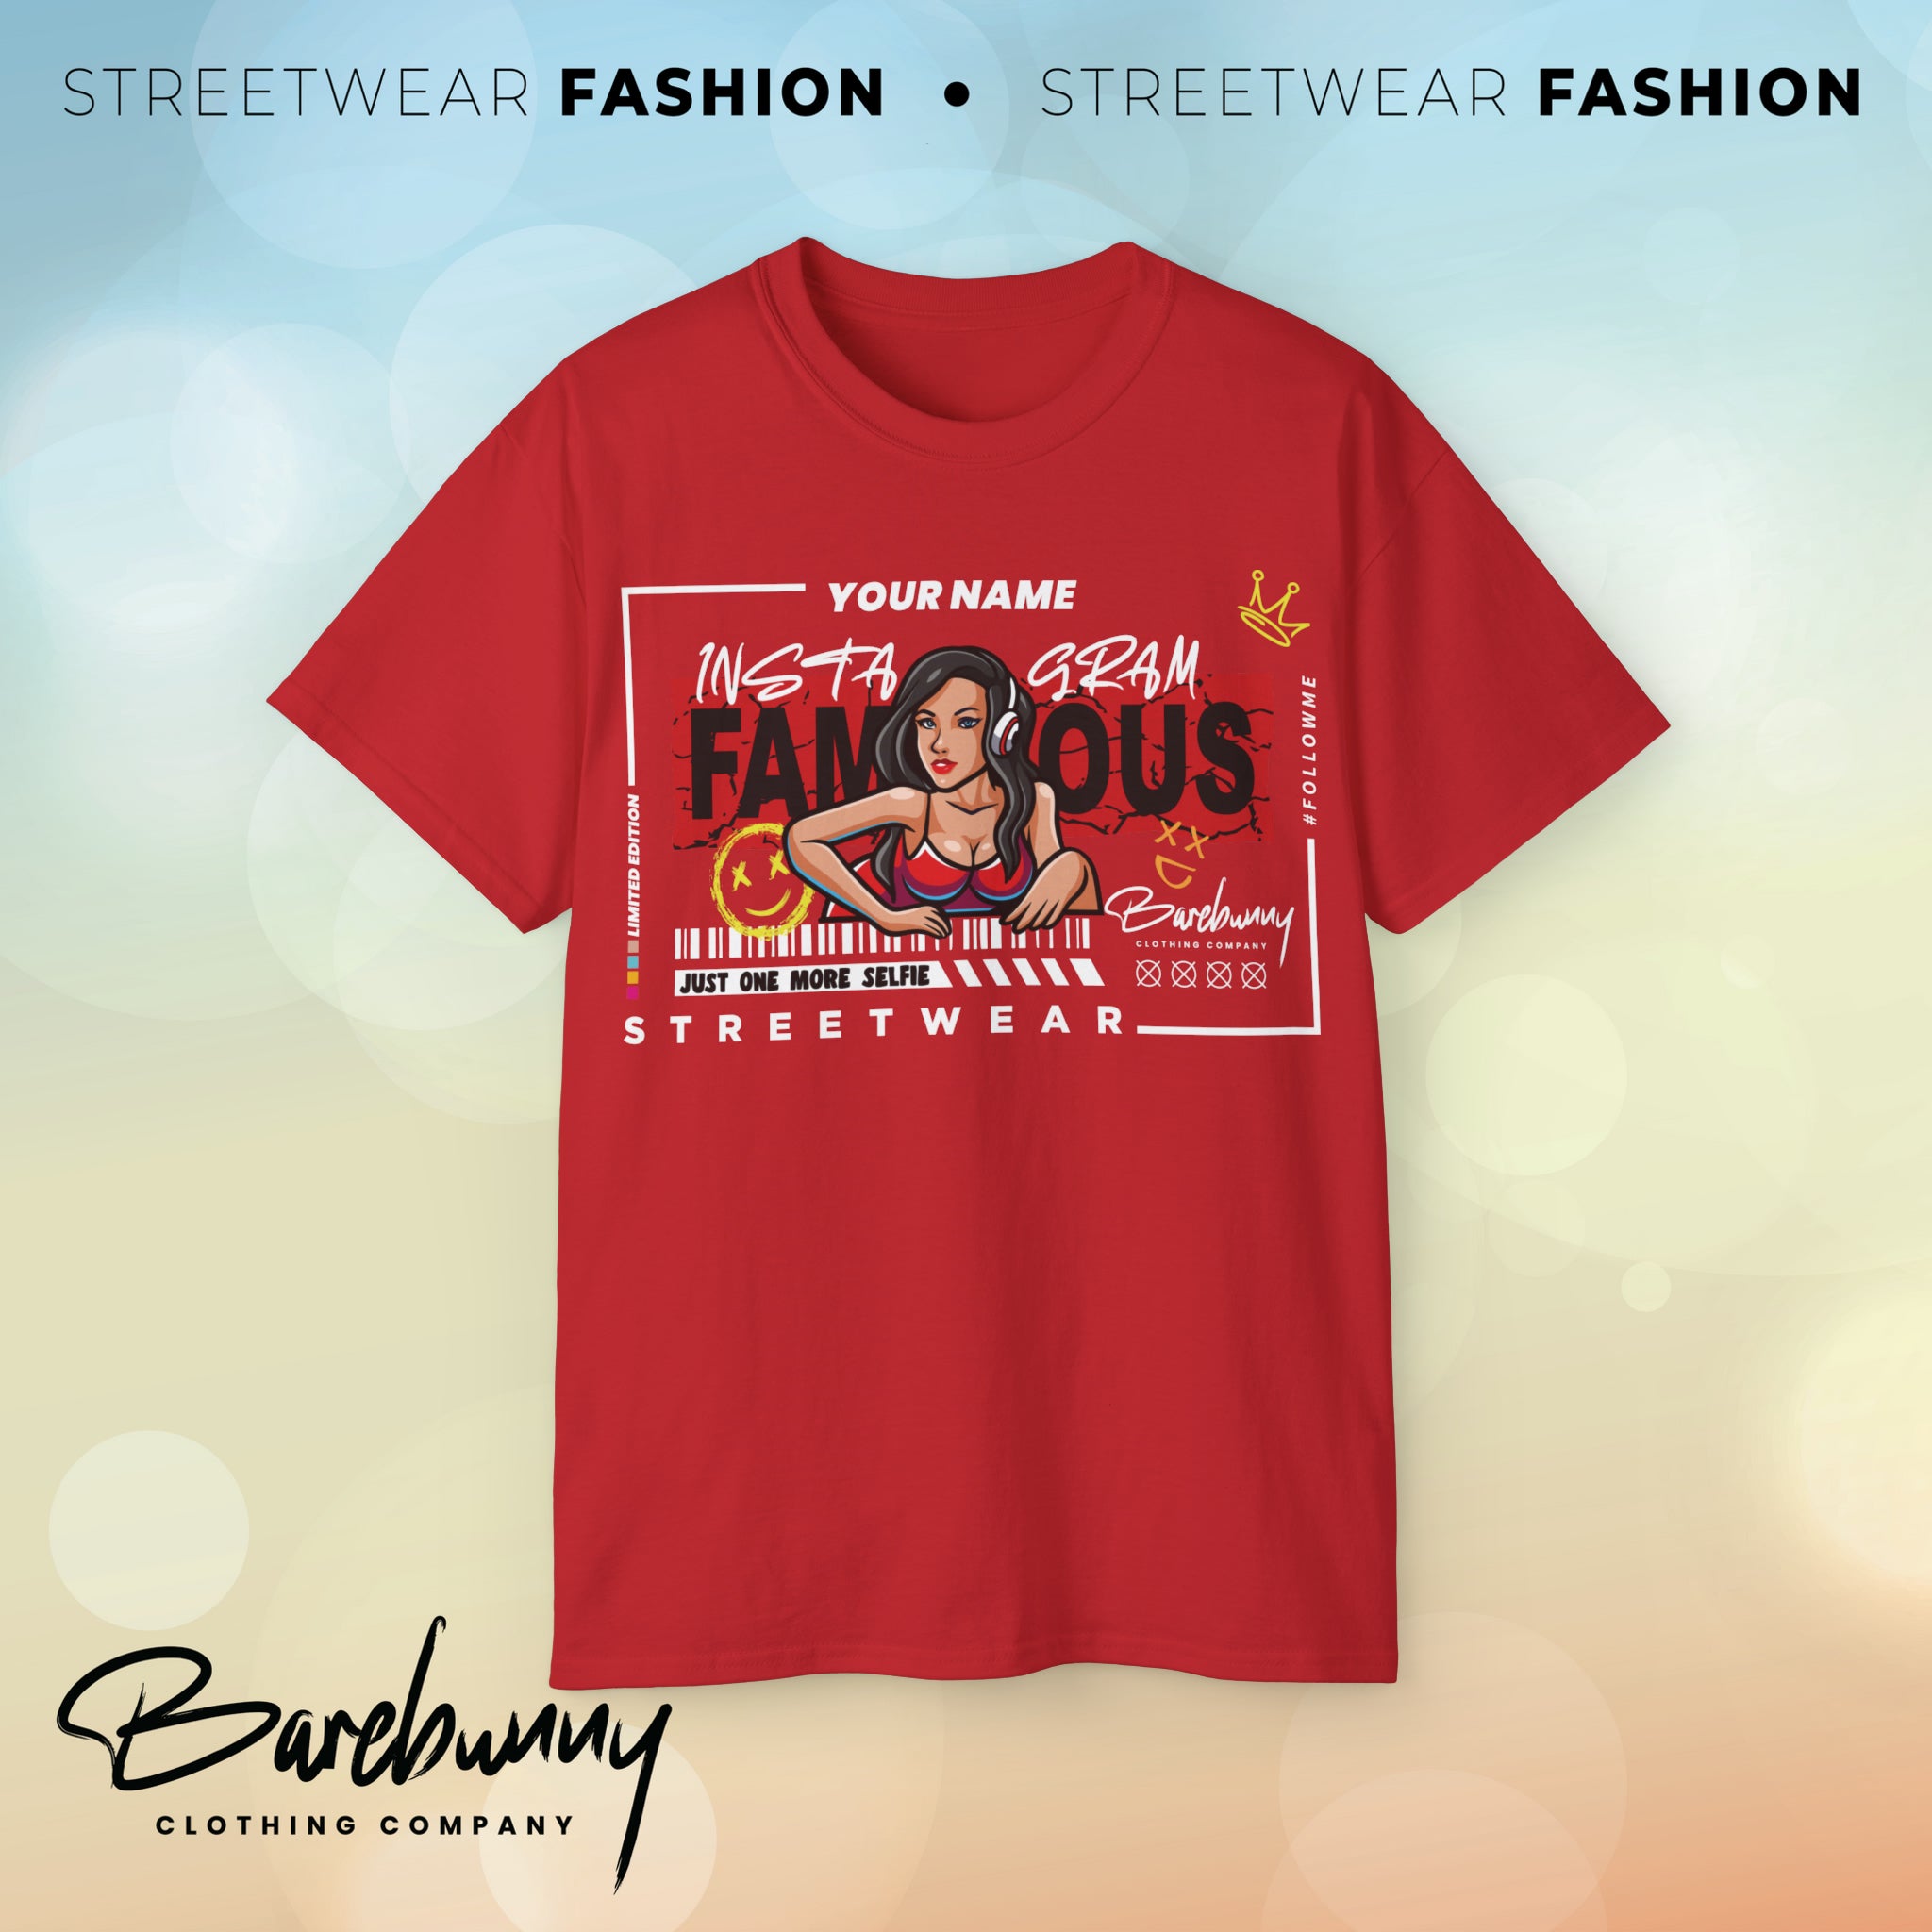 Barebunny - Instagram Famous (DTF) Unisex Ultra Cotton Tee (Red Top Girl)